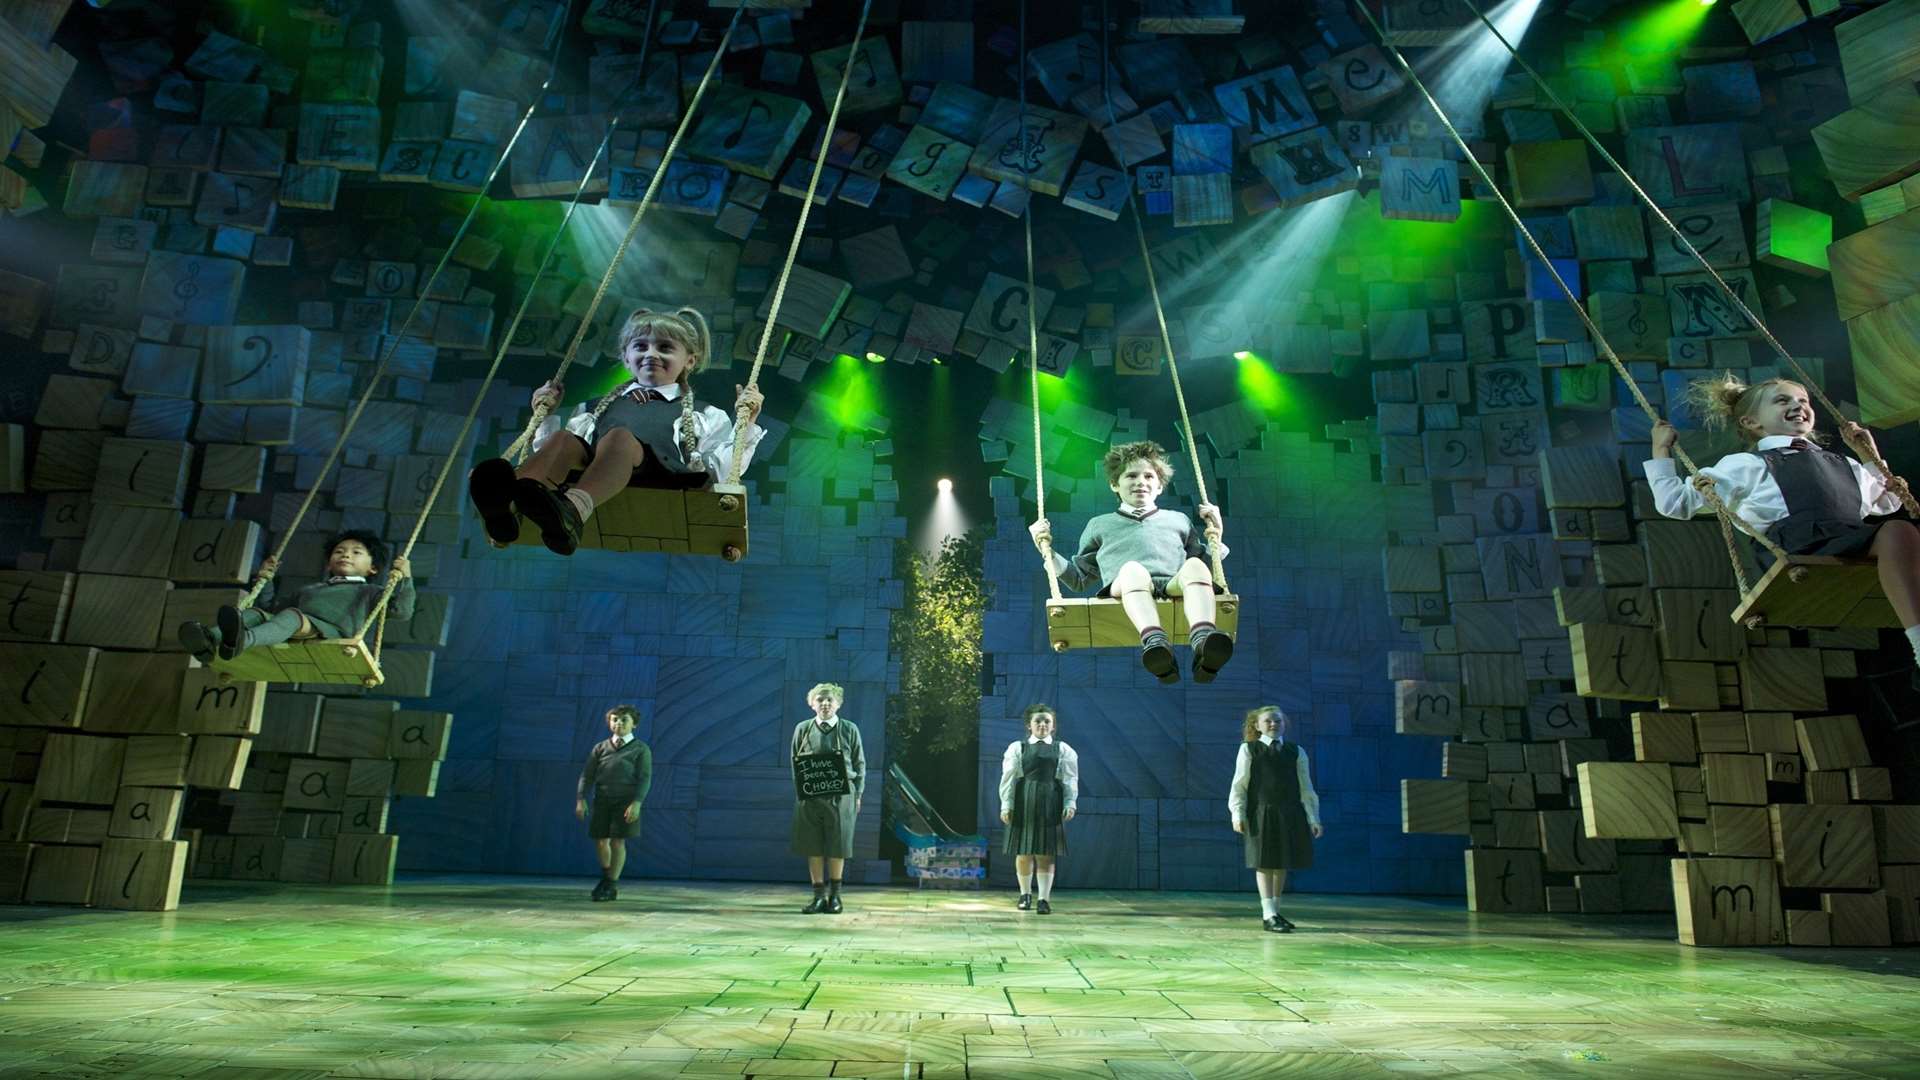 Matilda is one of the West End shows taking part